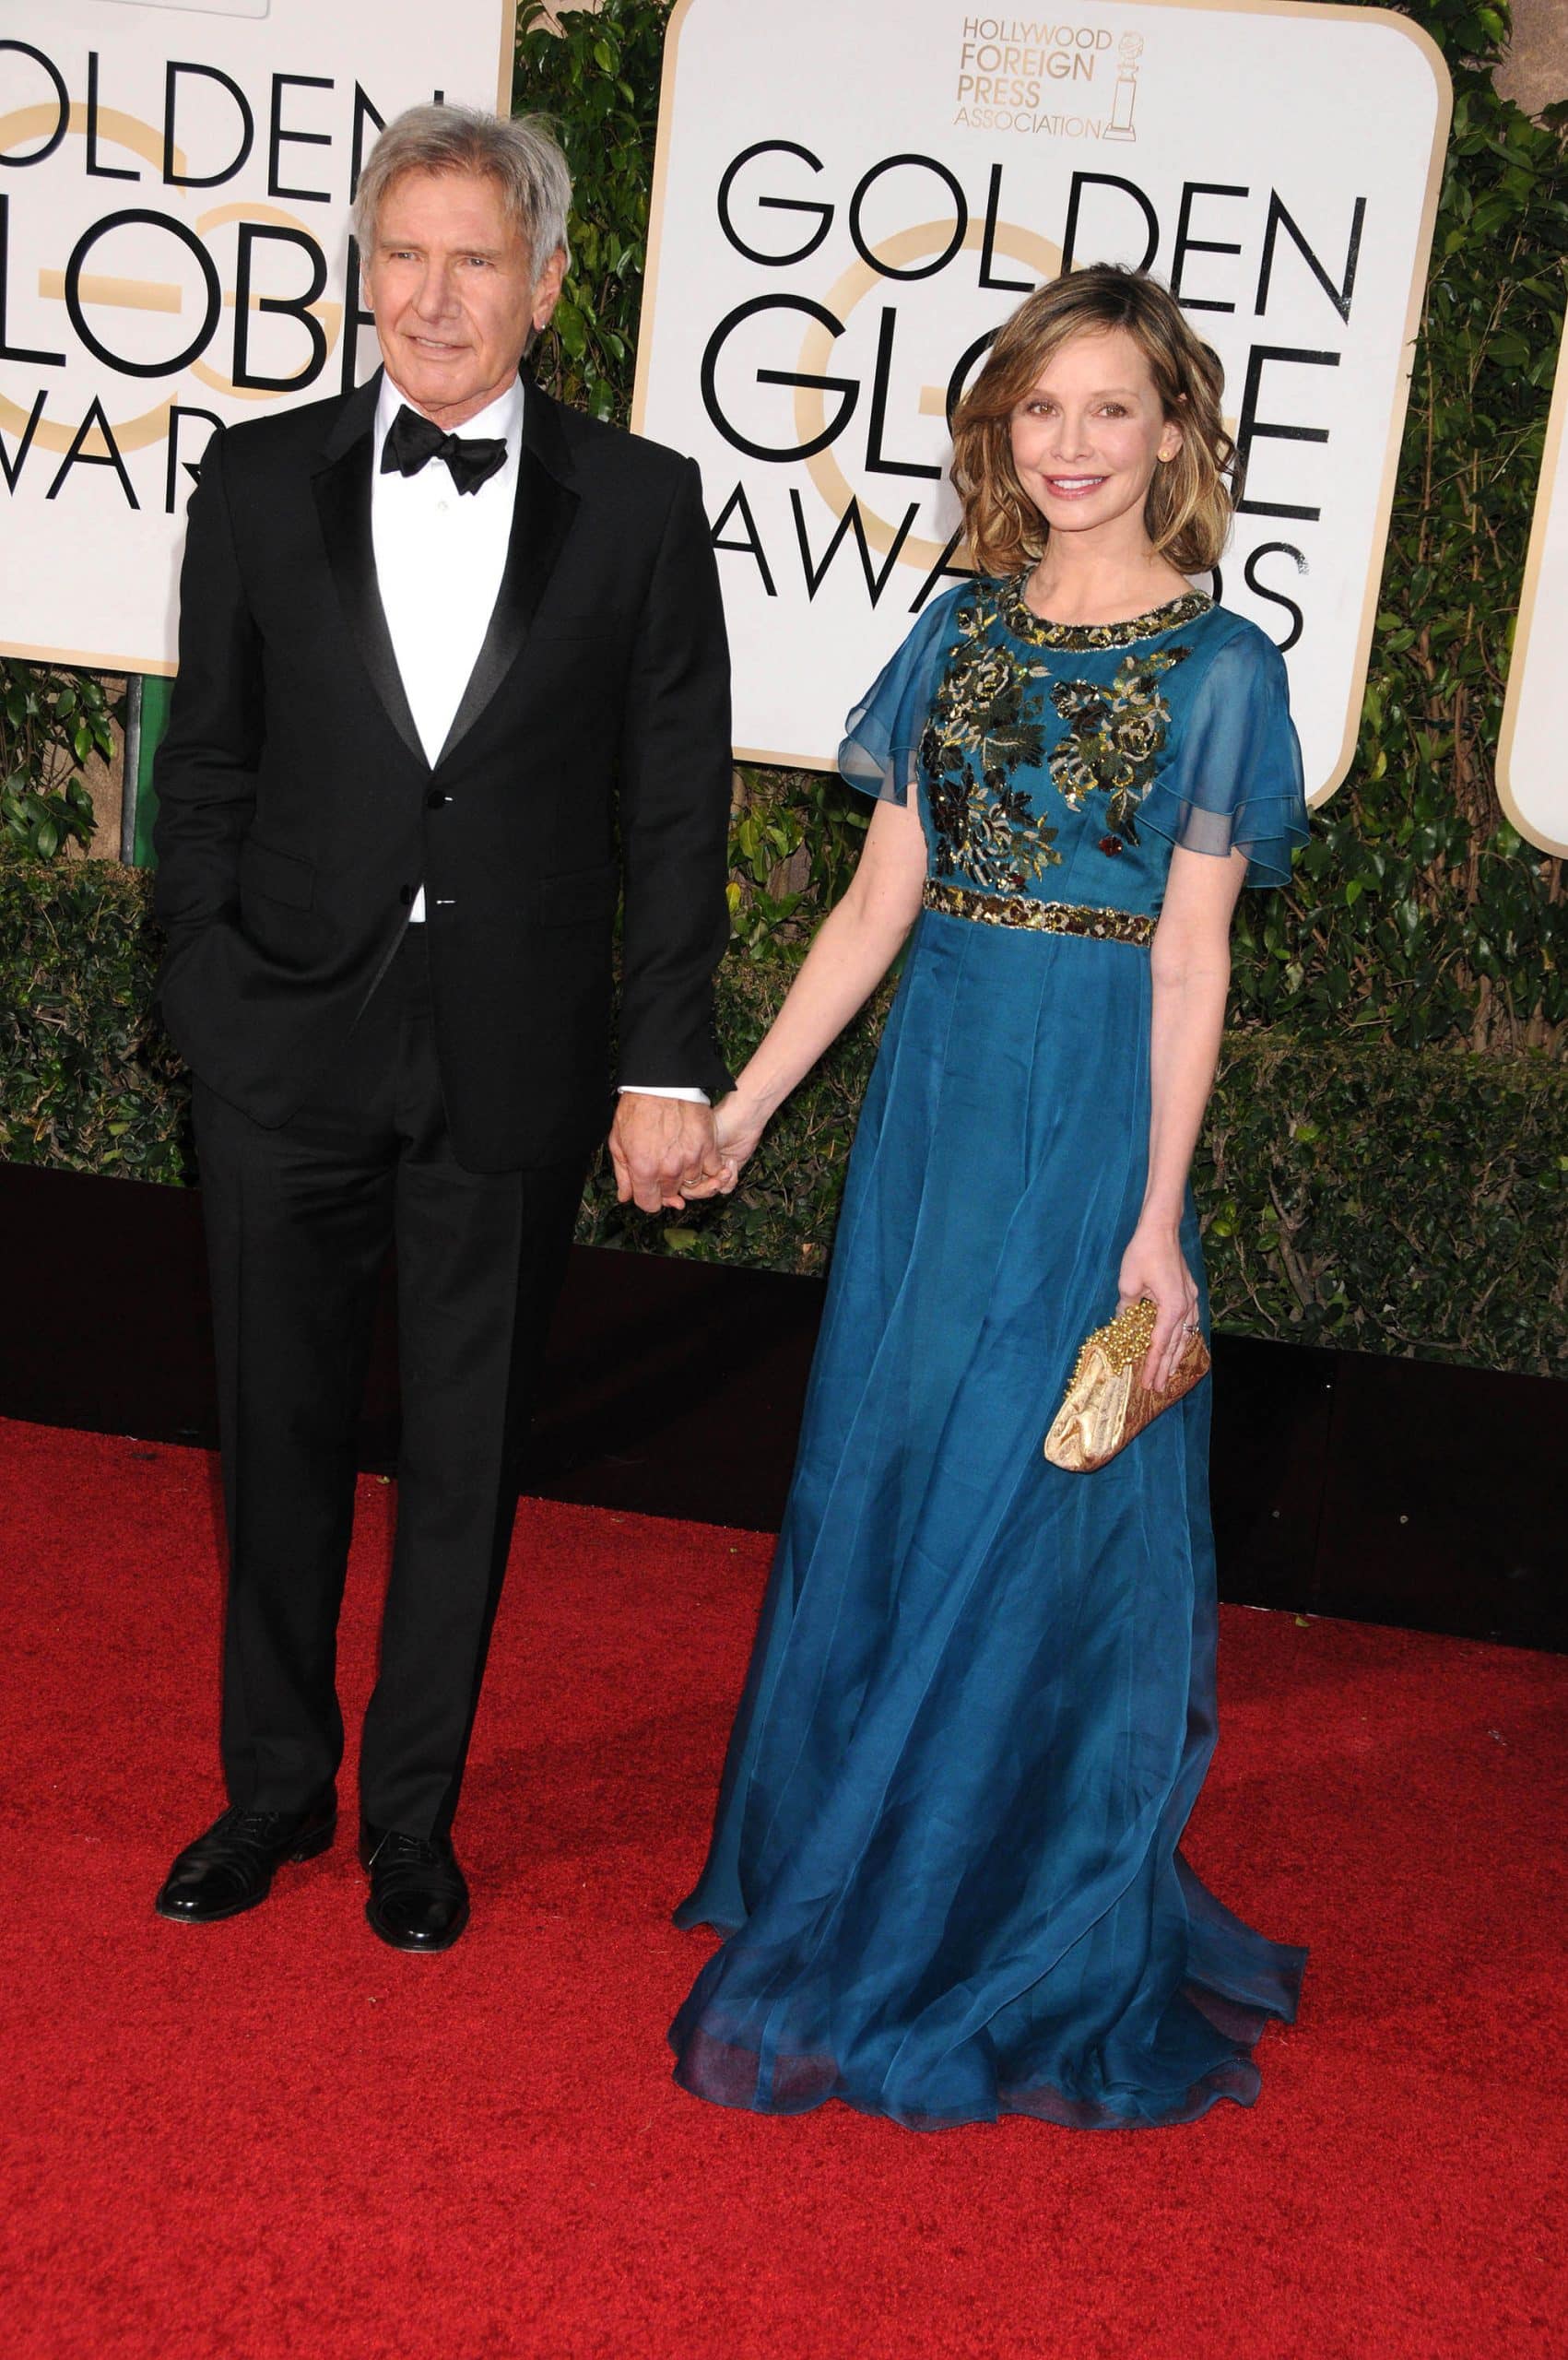 Harrison Ford and Calista Flockhart at The 73rd Annual Golden Globe Awards